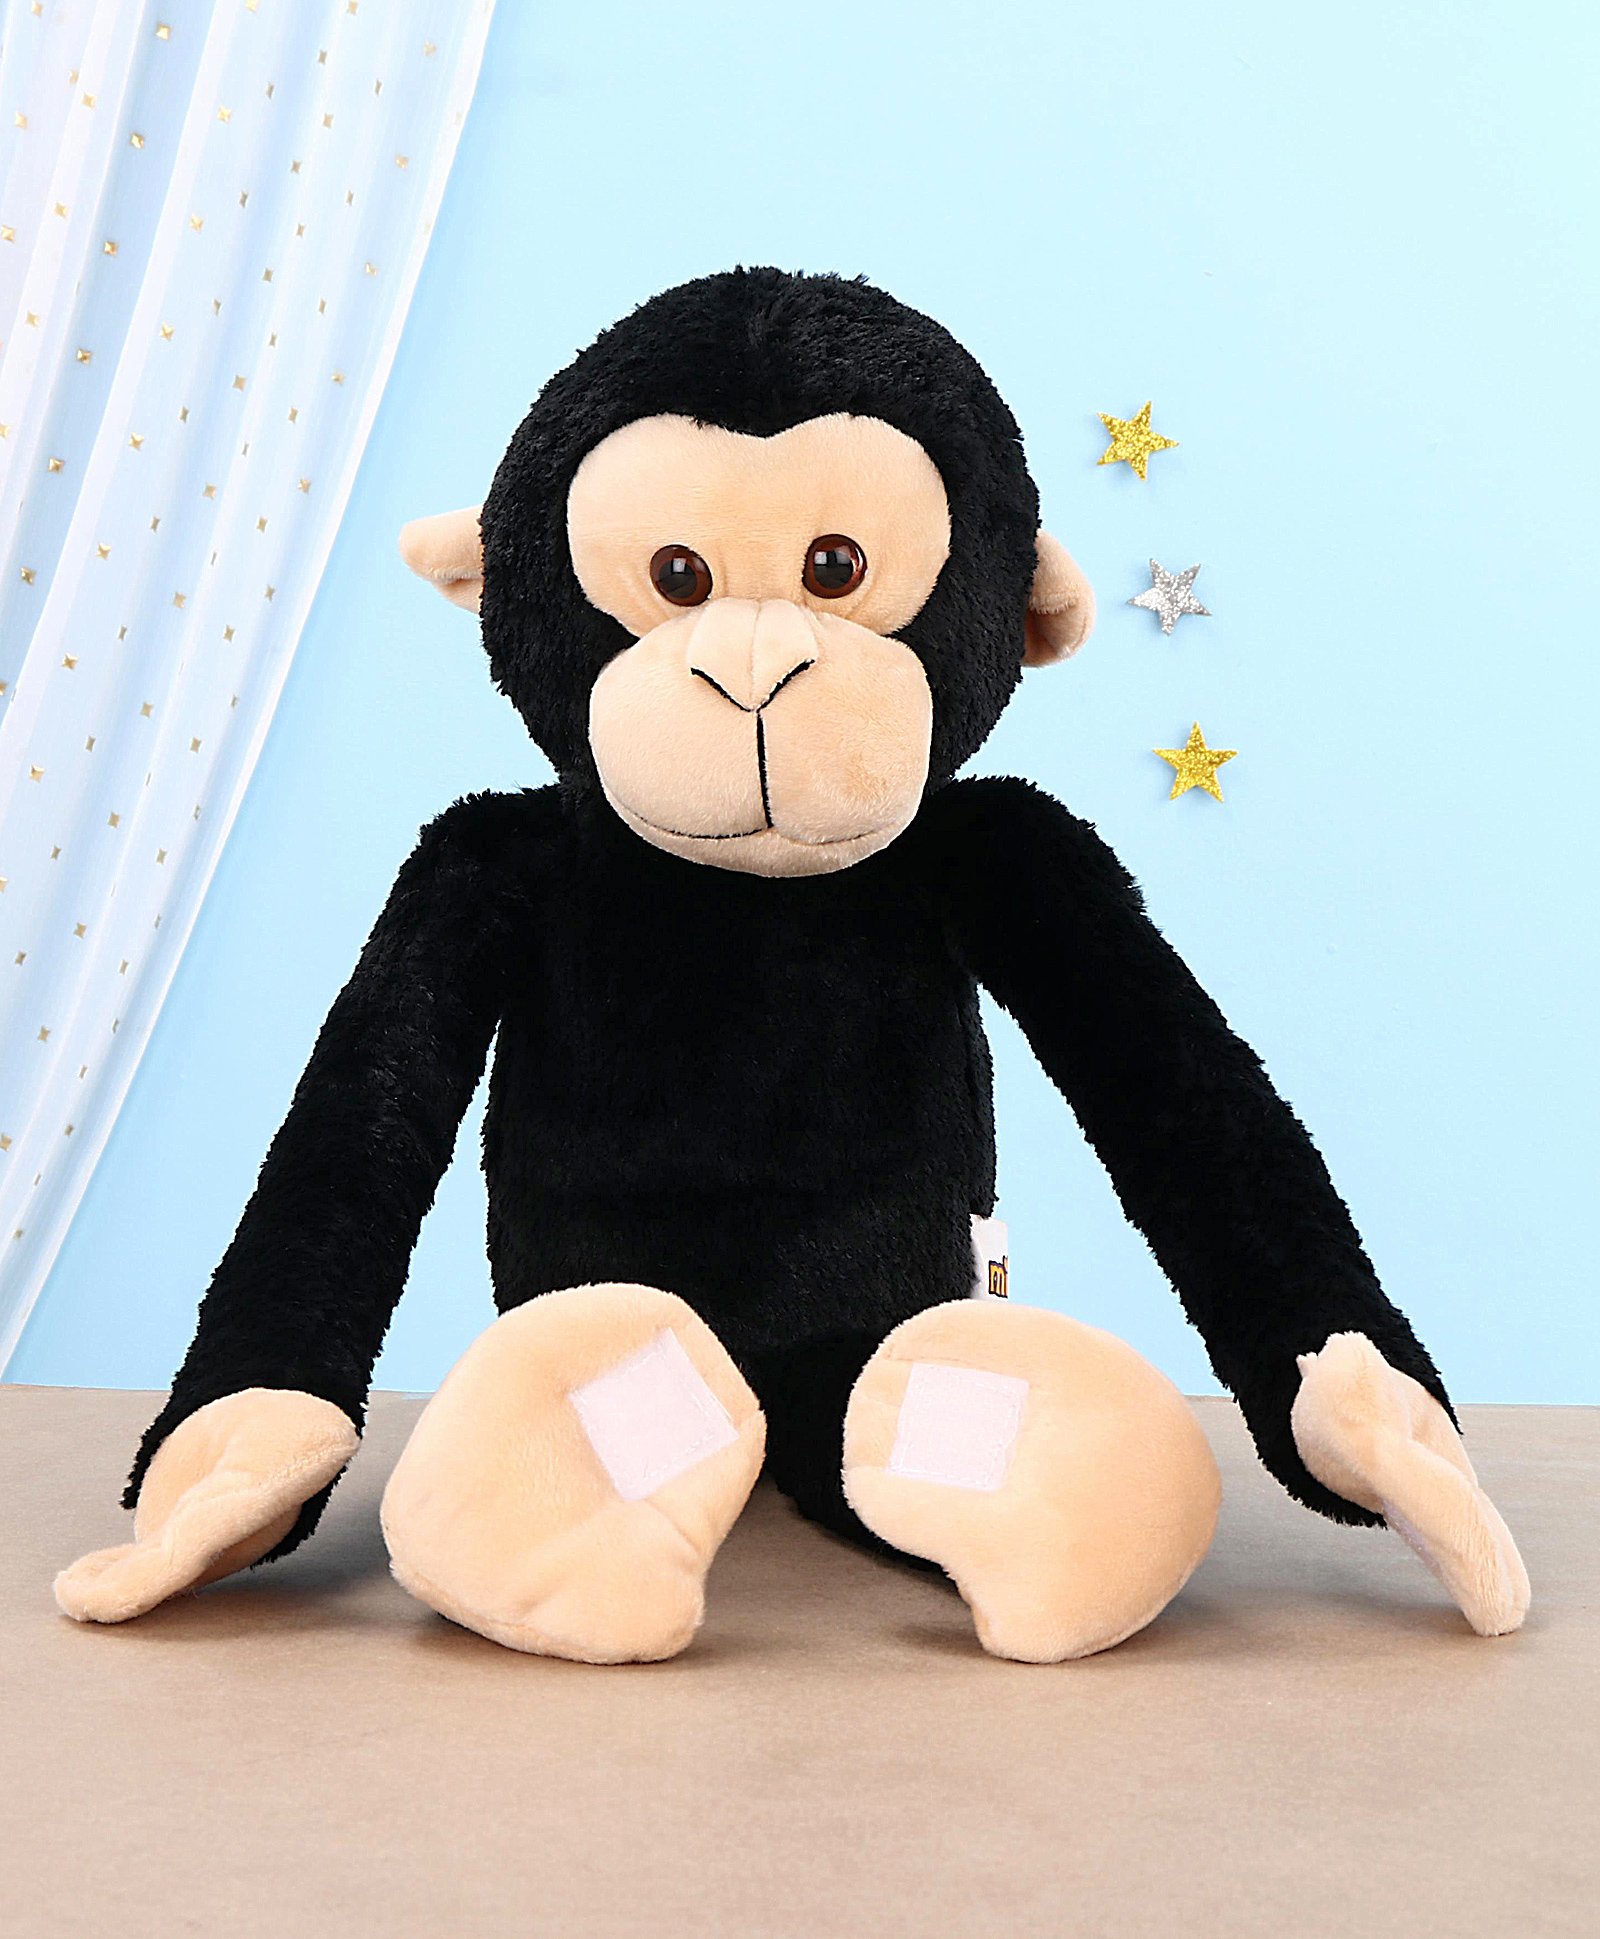 Mirada Monkey Soft Toy Black Height 52 Cm Online India Buy Soft Toys For 3 14 Years At Firstcry Com